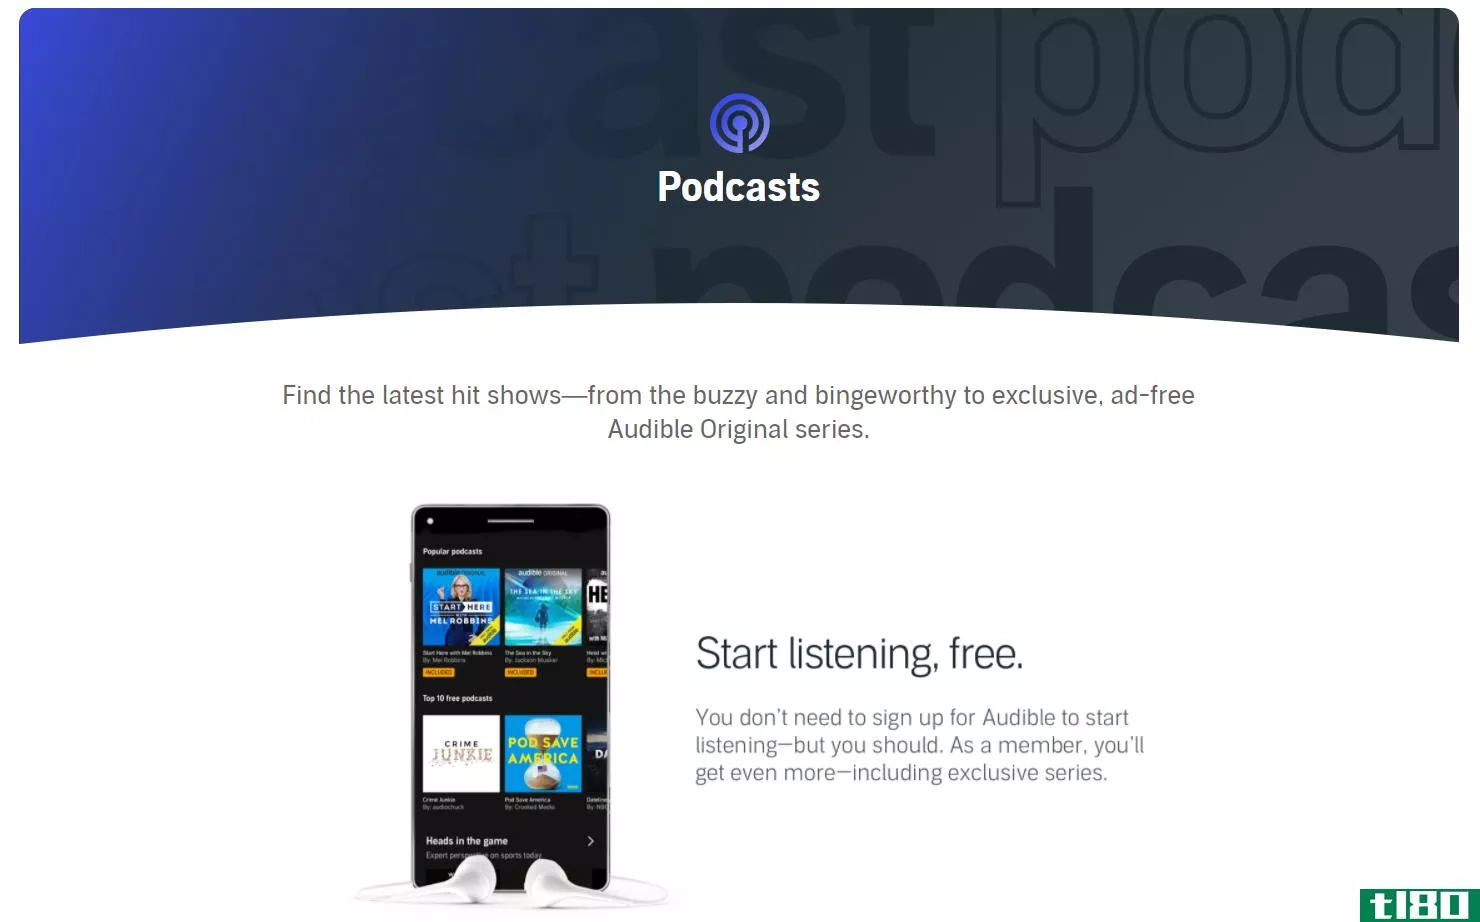 audible podcasts website